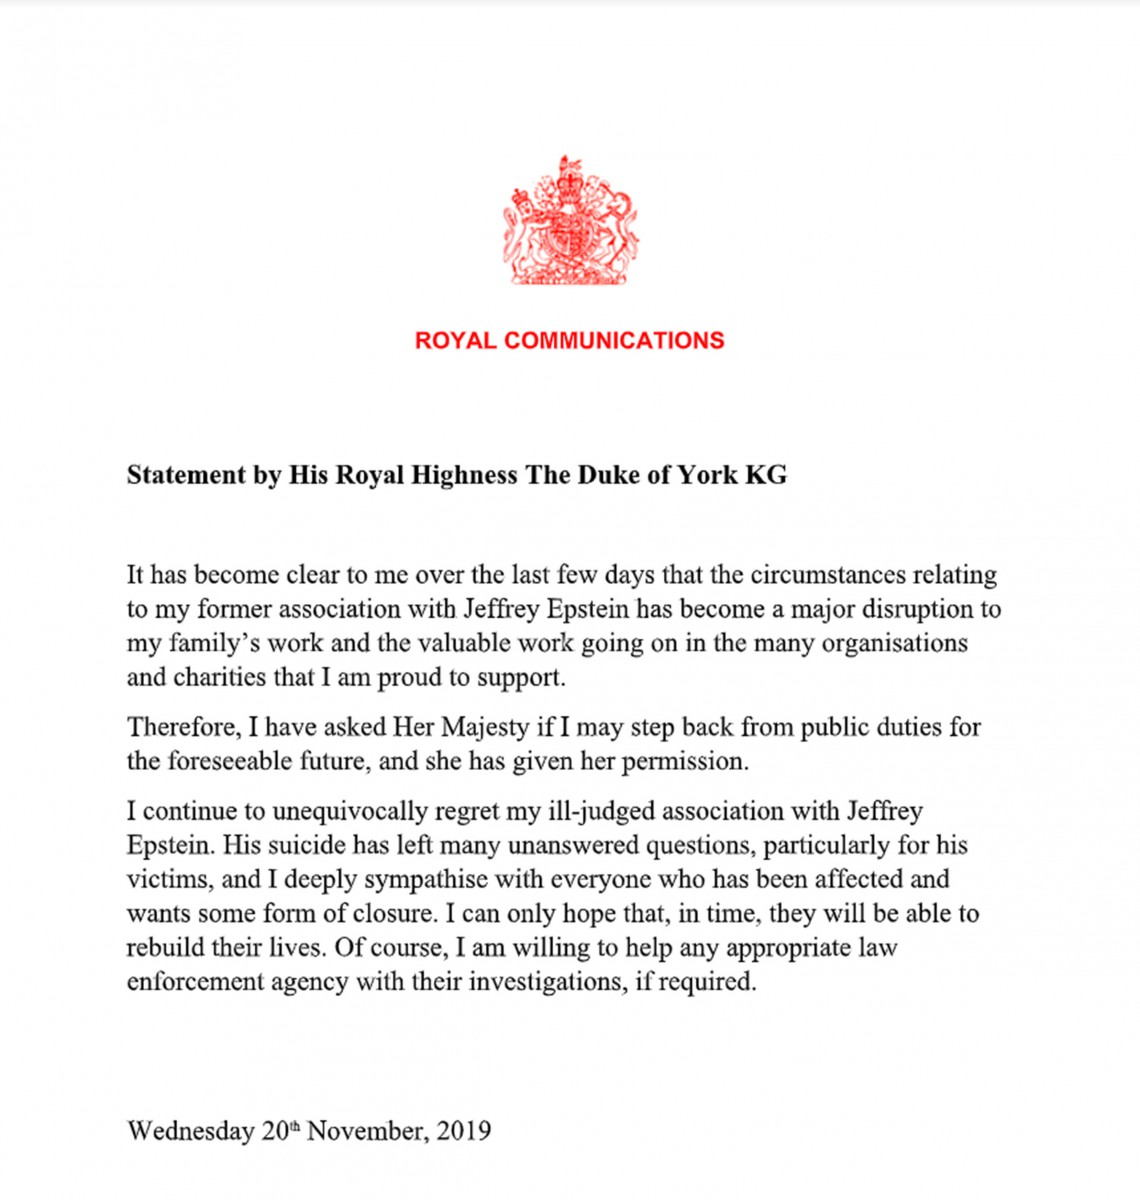 The statement released by Prince Andrew last night